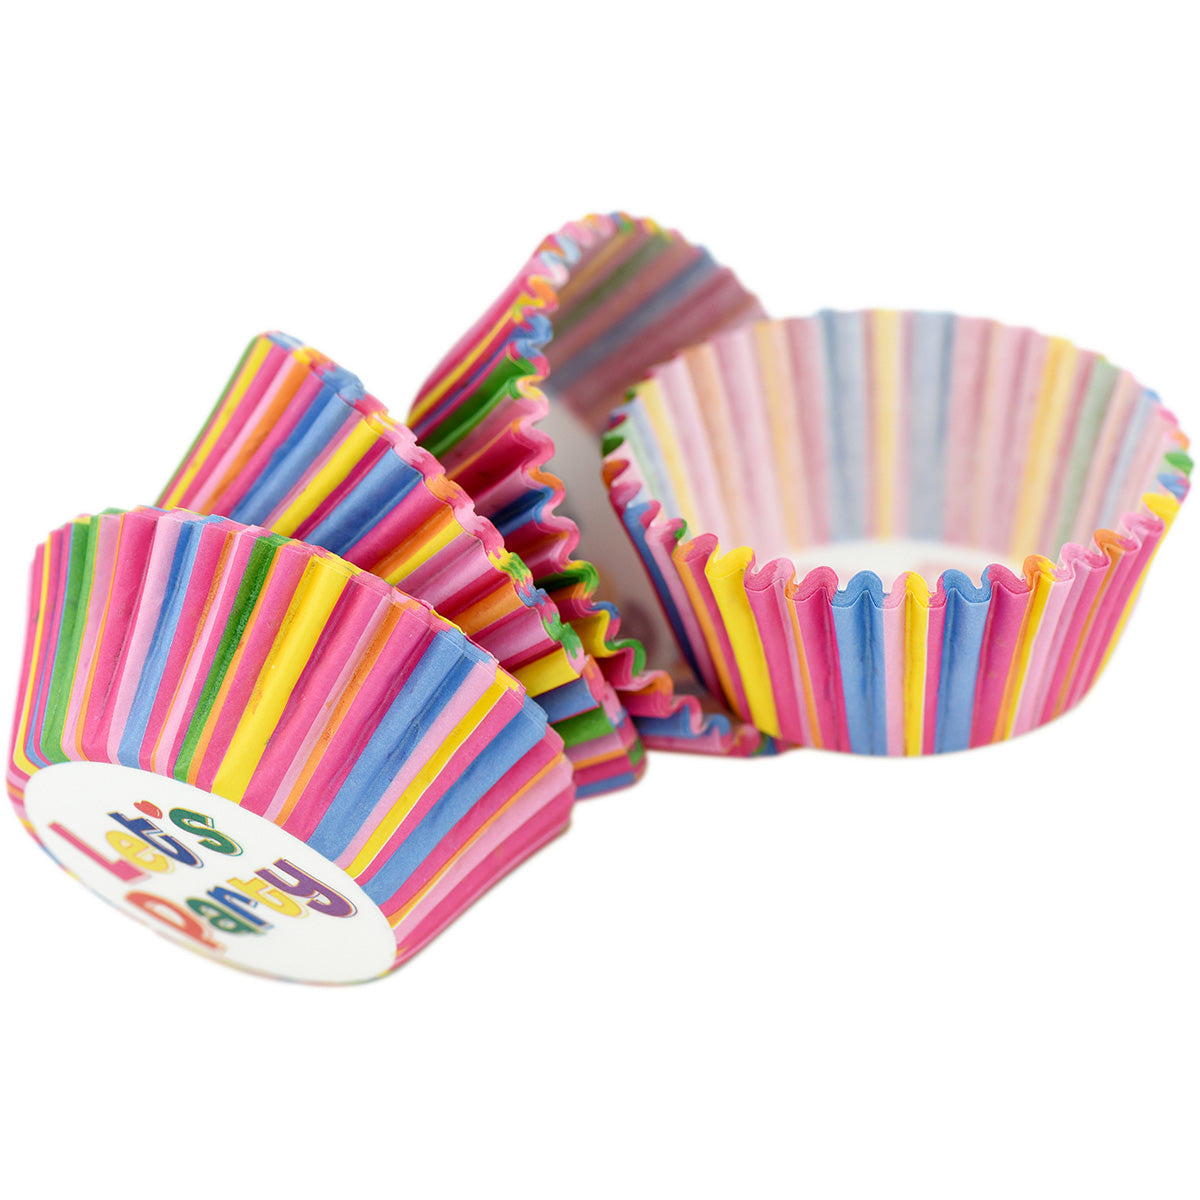 100-Pack Cupcake Muffin Baking Paper Cases Liners Style 38